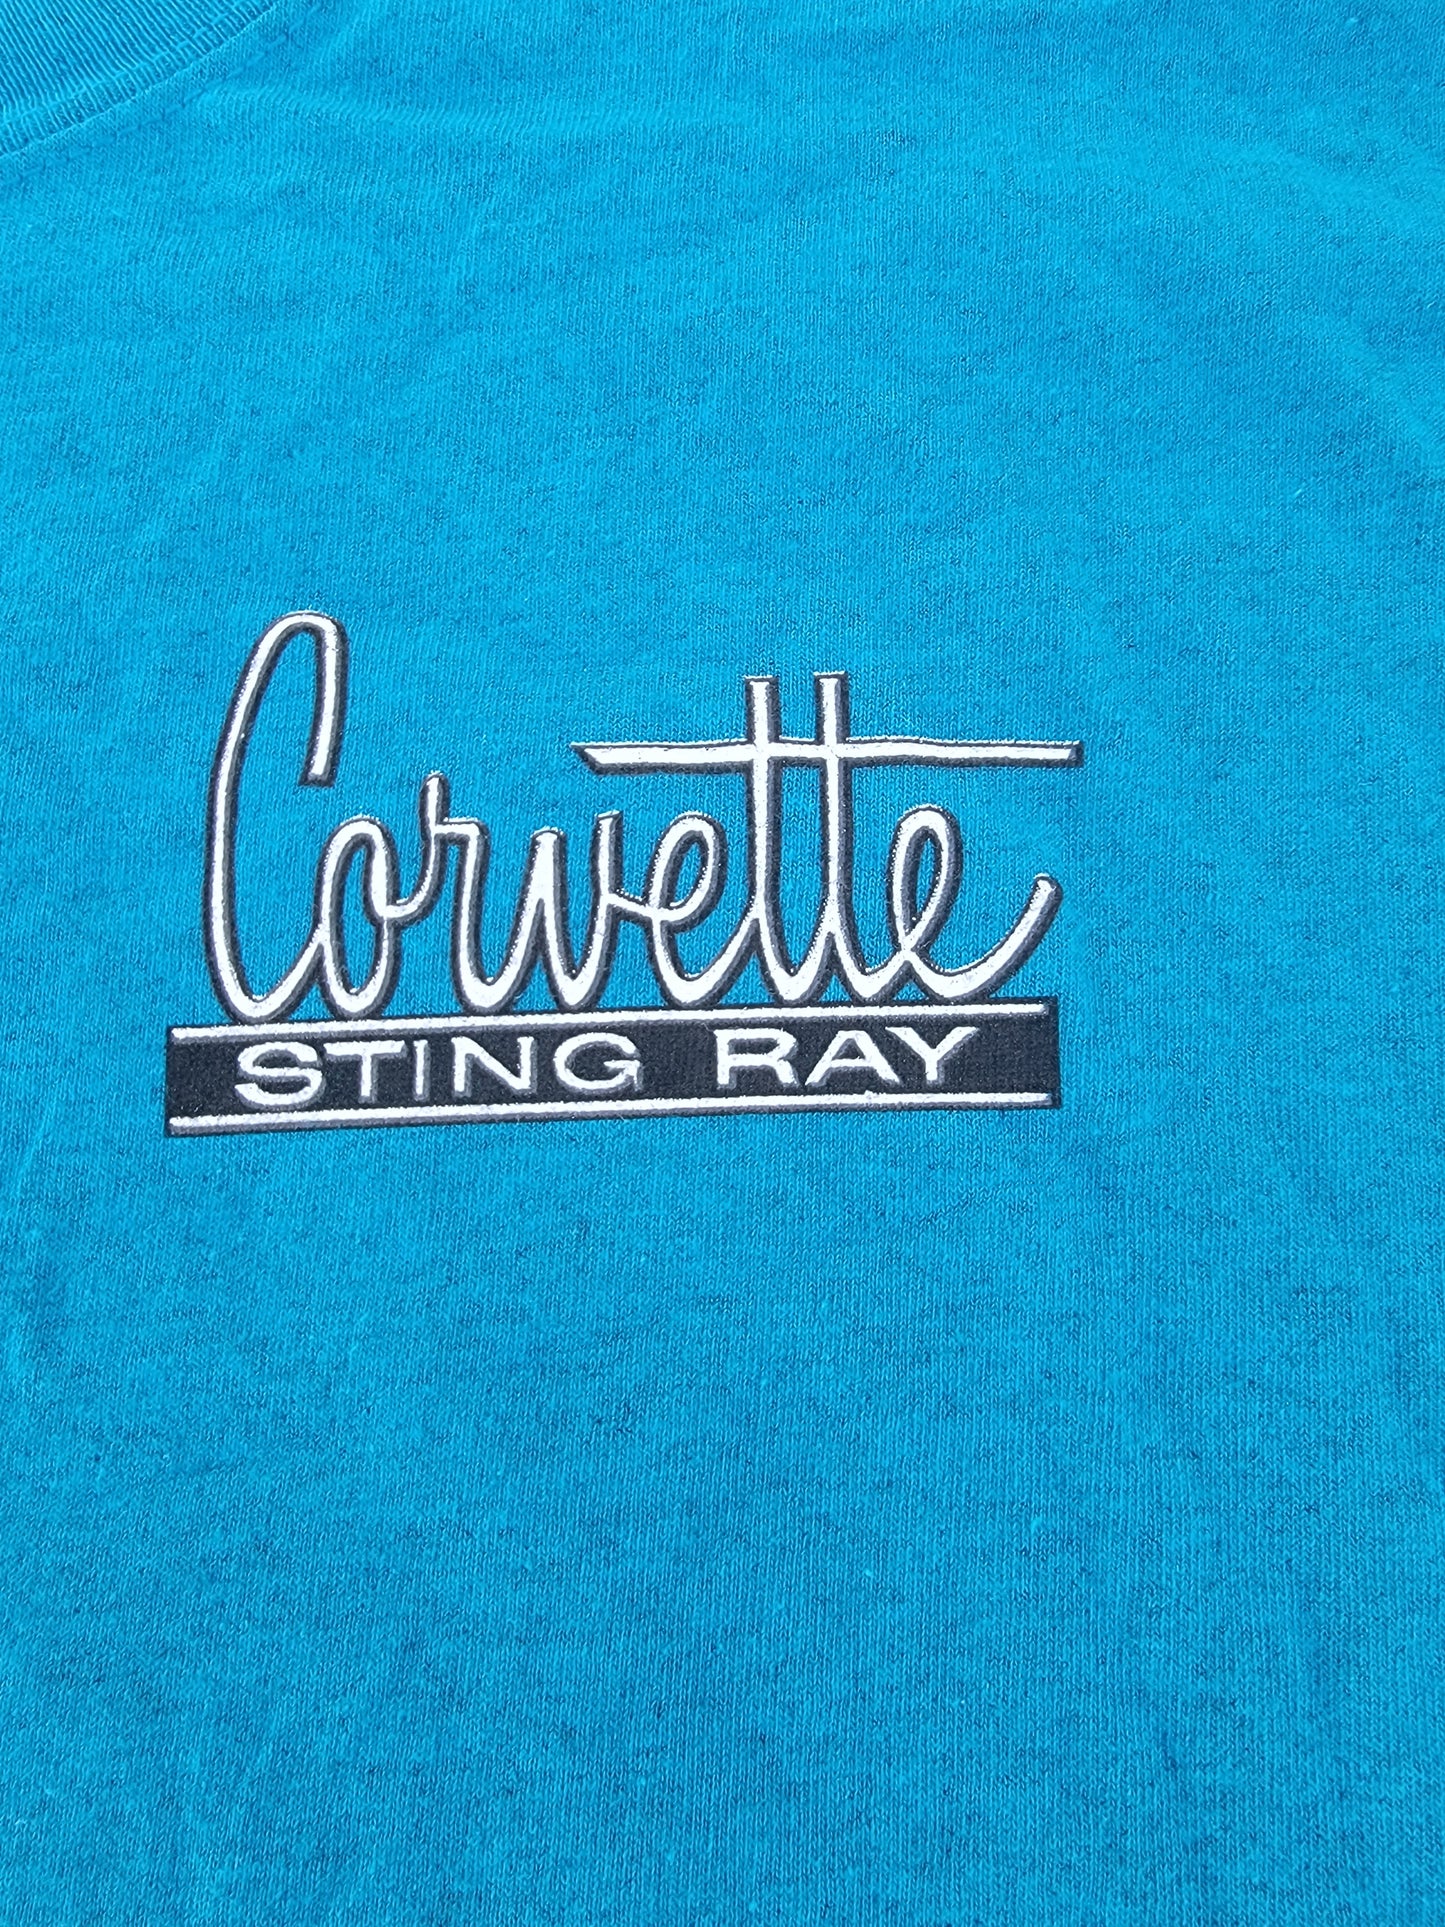 Brand new corvette sting ray large t-shirt
brand new blue corvette stingray large t-shirt. shirt has three angles of silver stingray on the back. t-shirt is in near perfect condition.